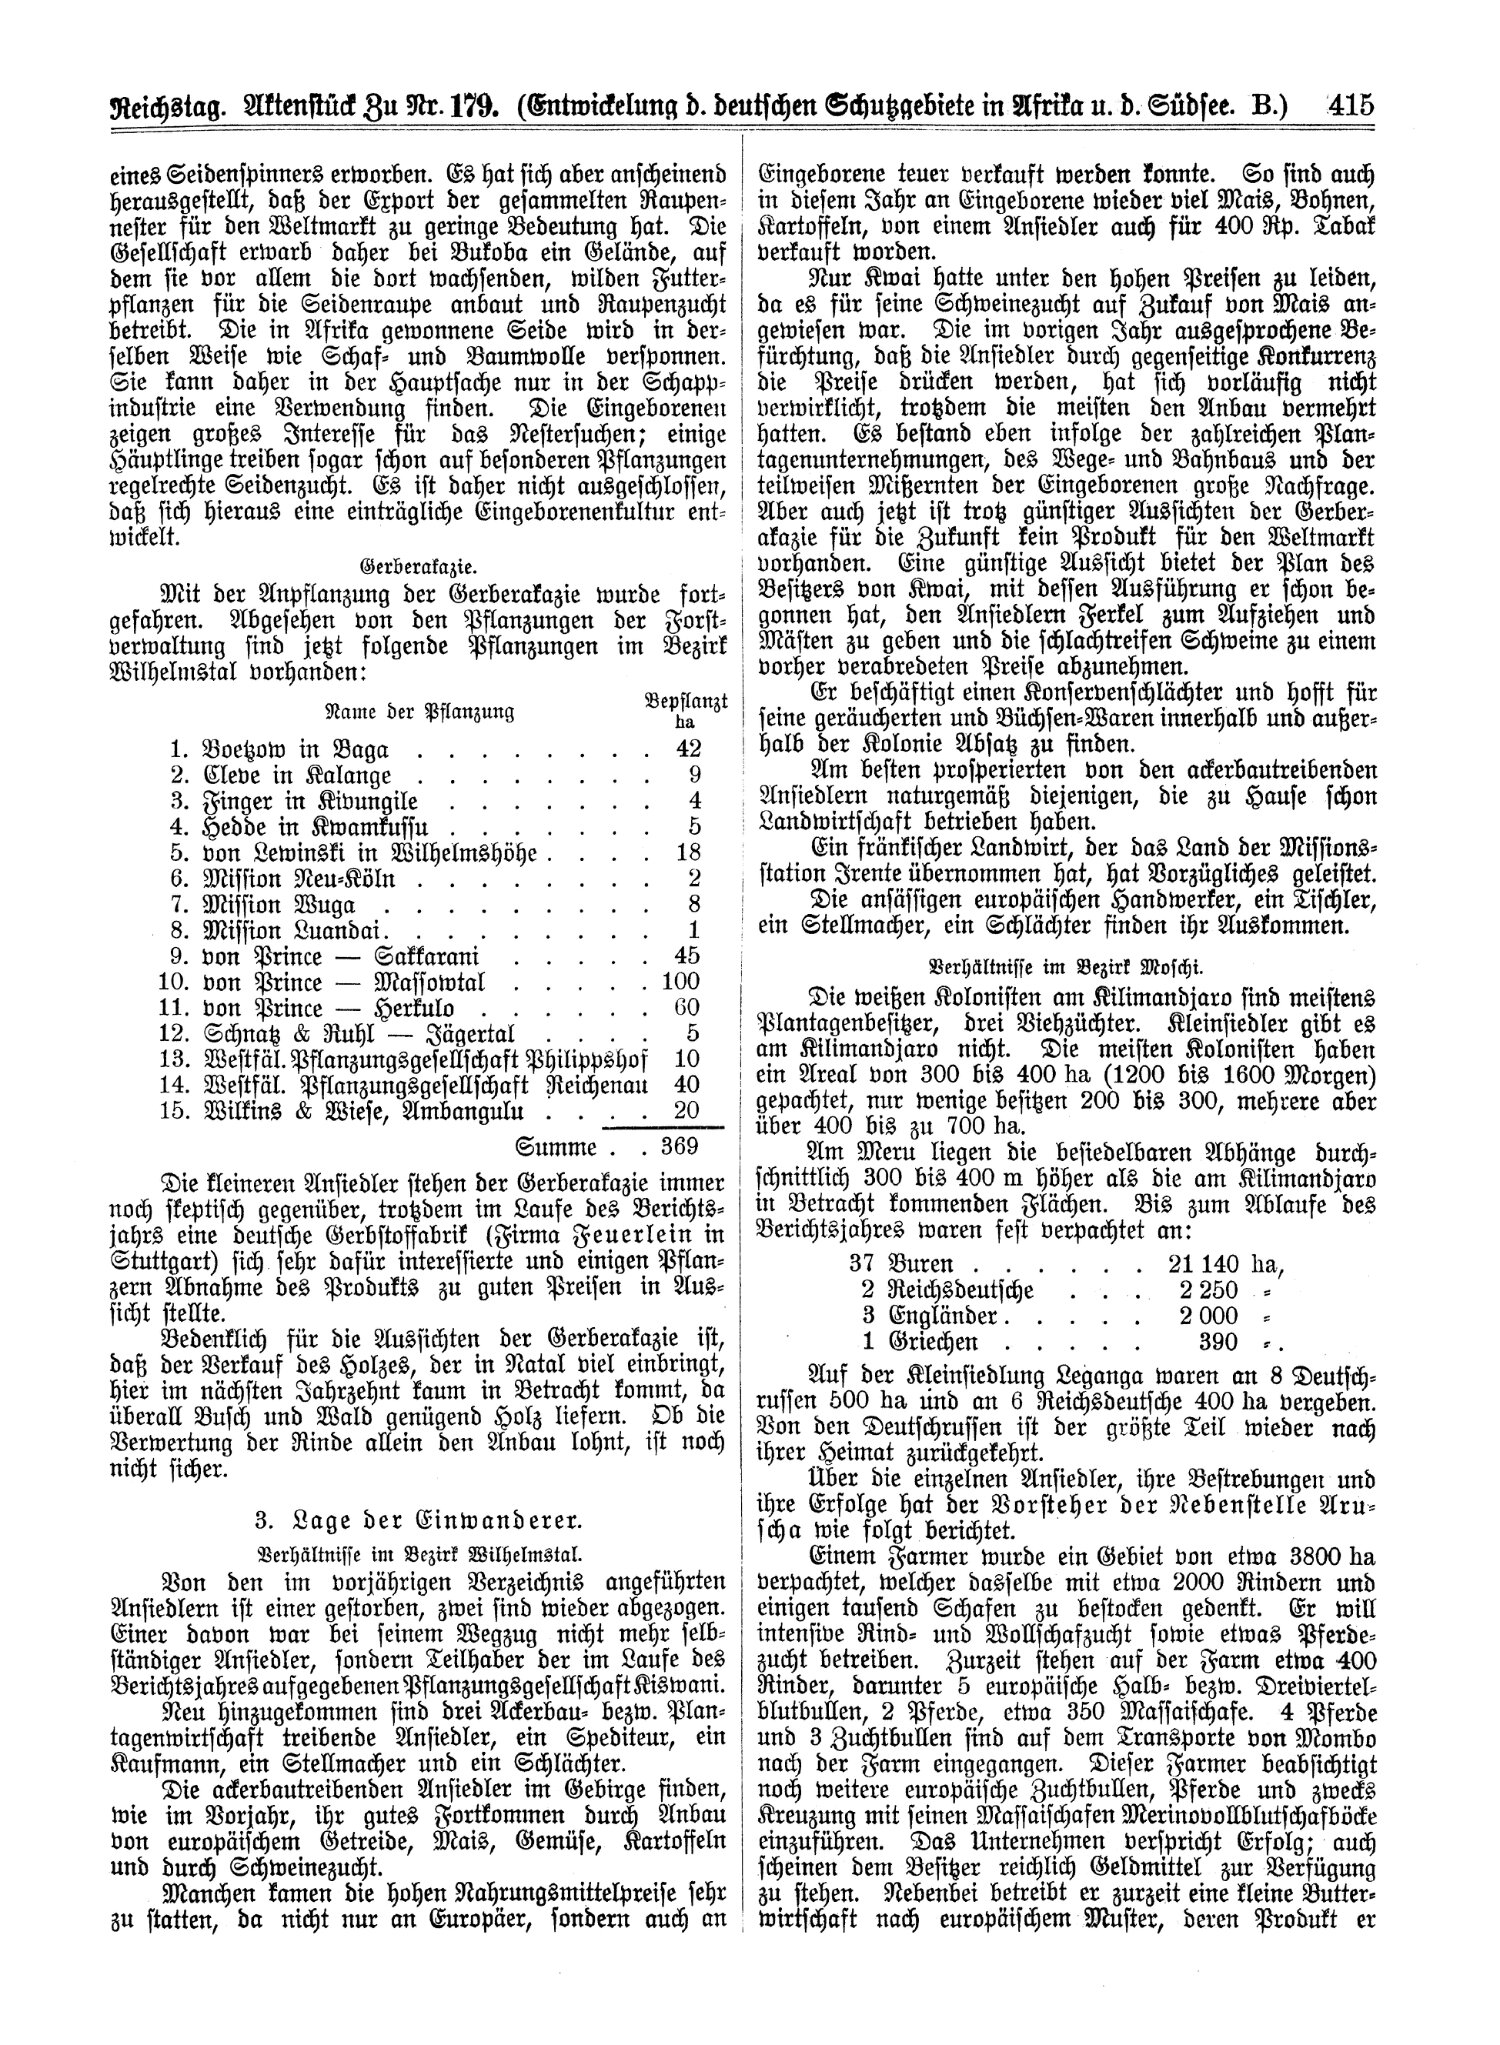 Scan of page 415